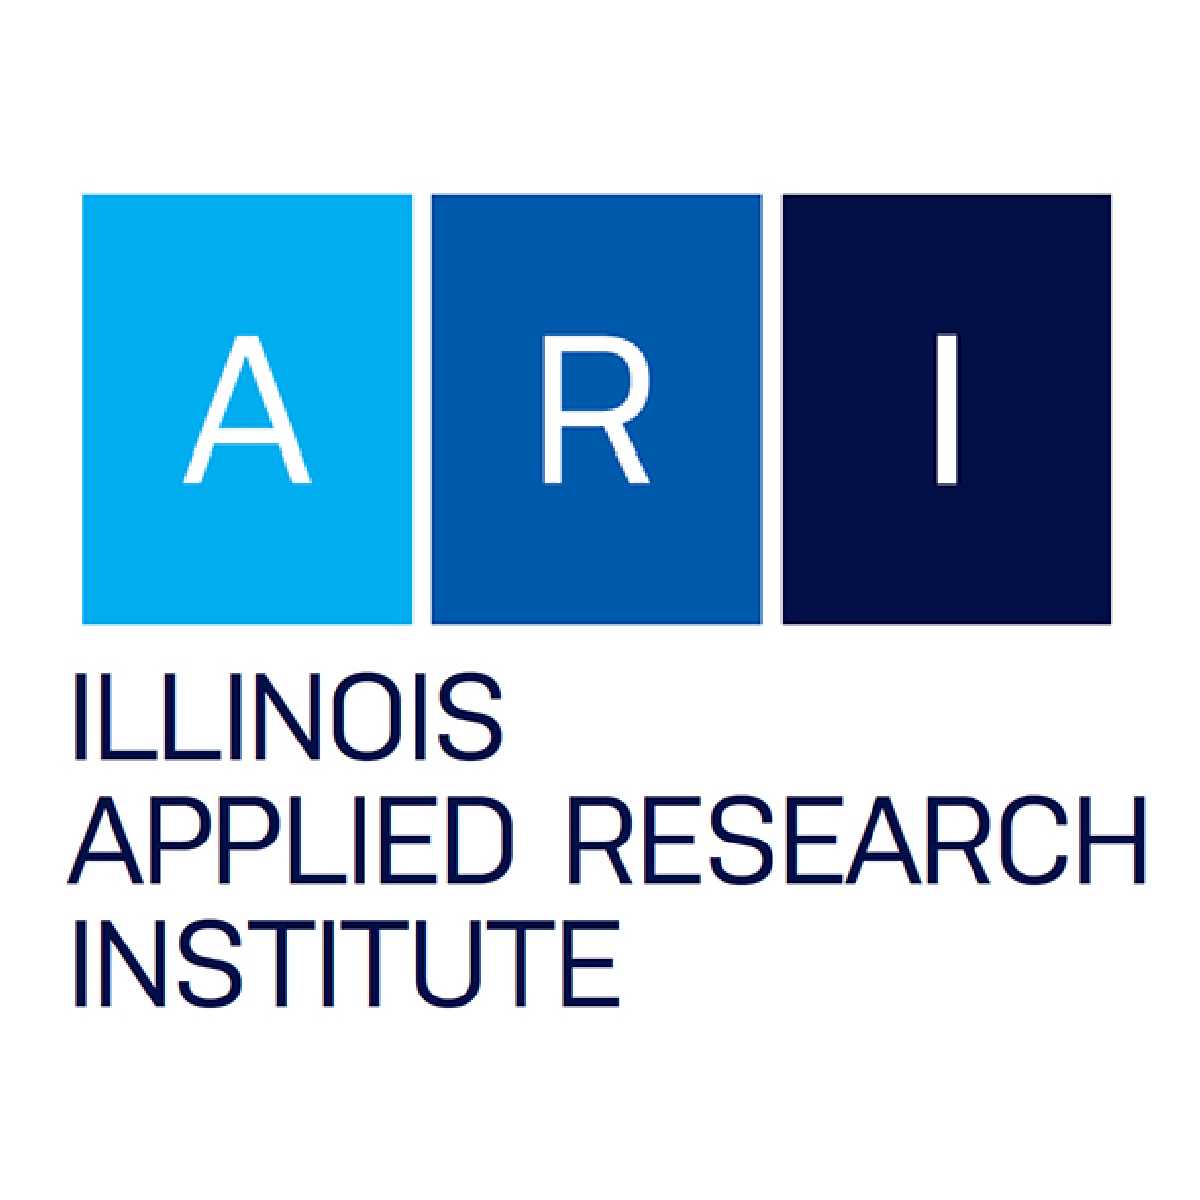 Illinois Applied Research Institute logo